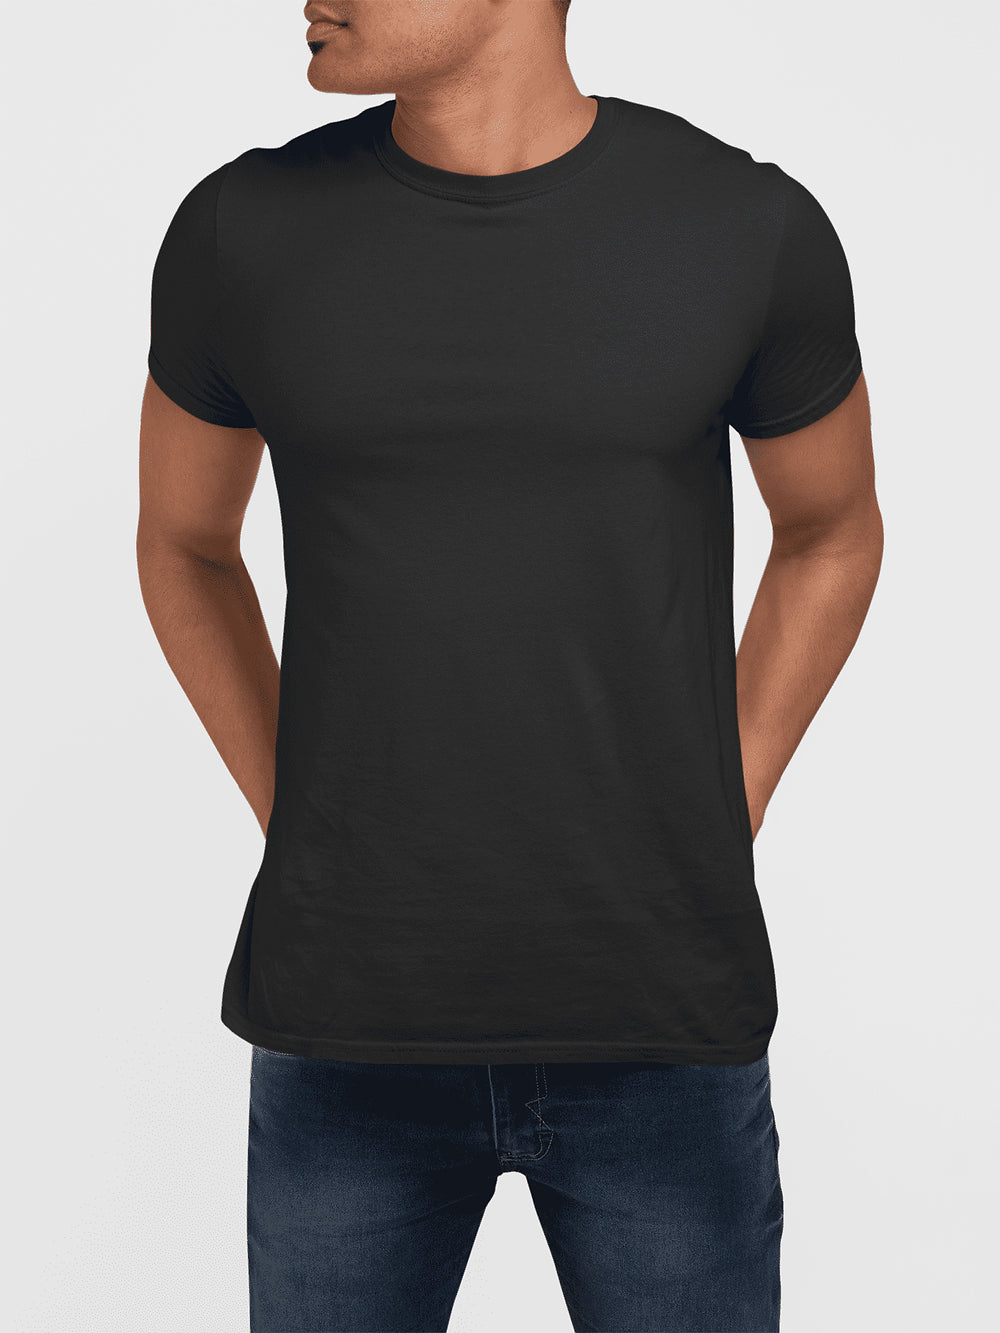 T-shirts for Men